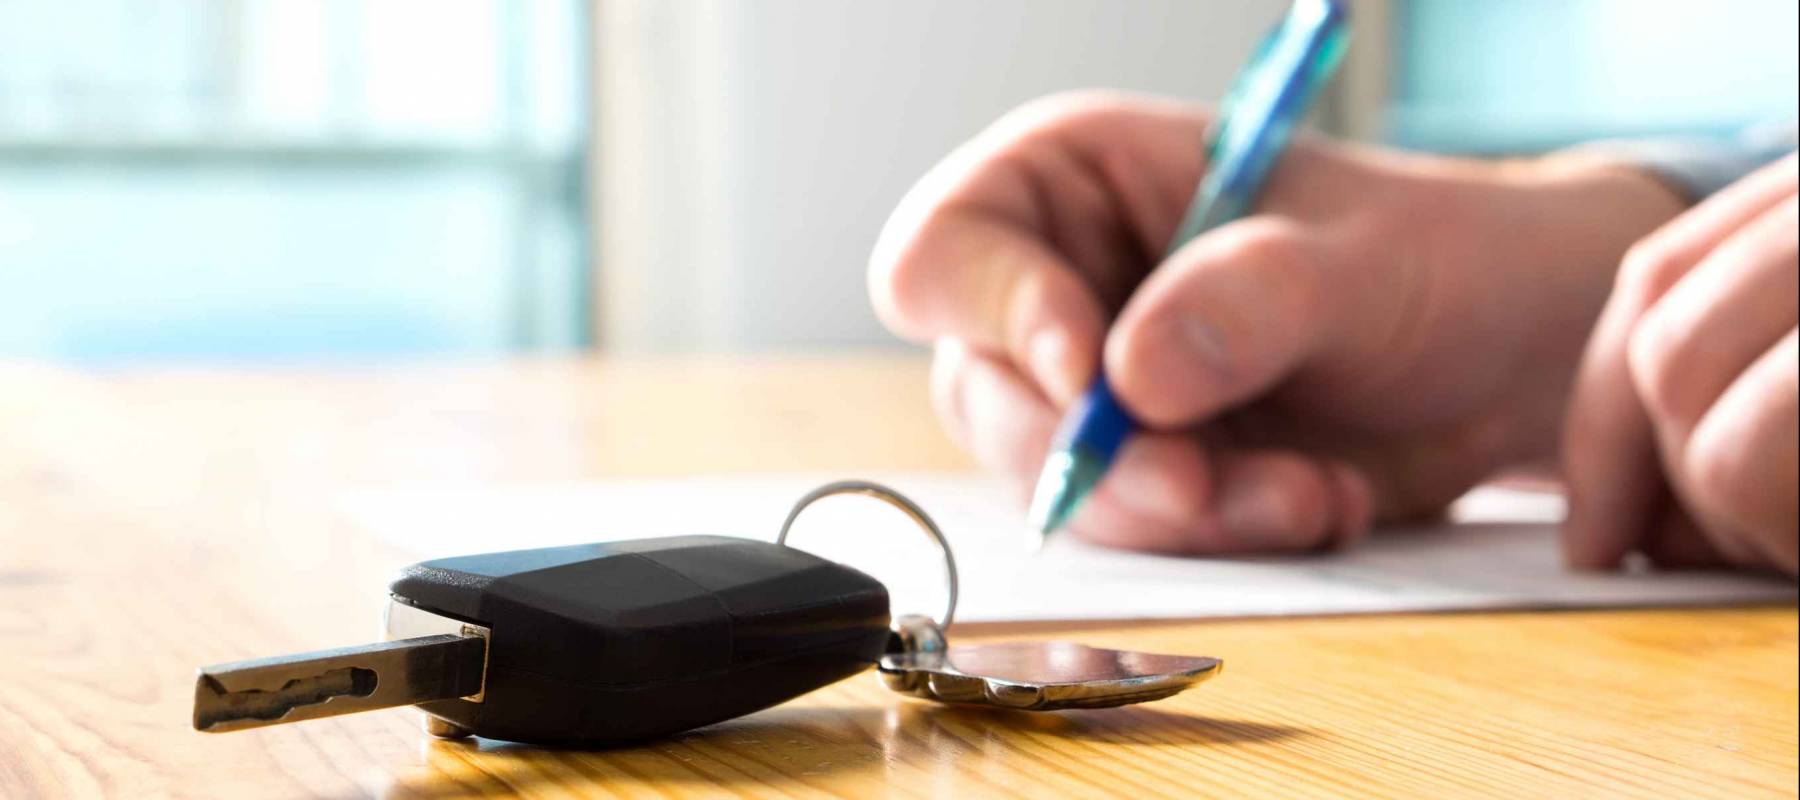 A hand signing a document next to a car key laying on a table